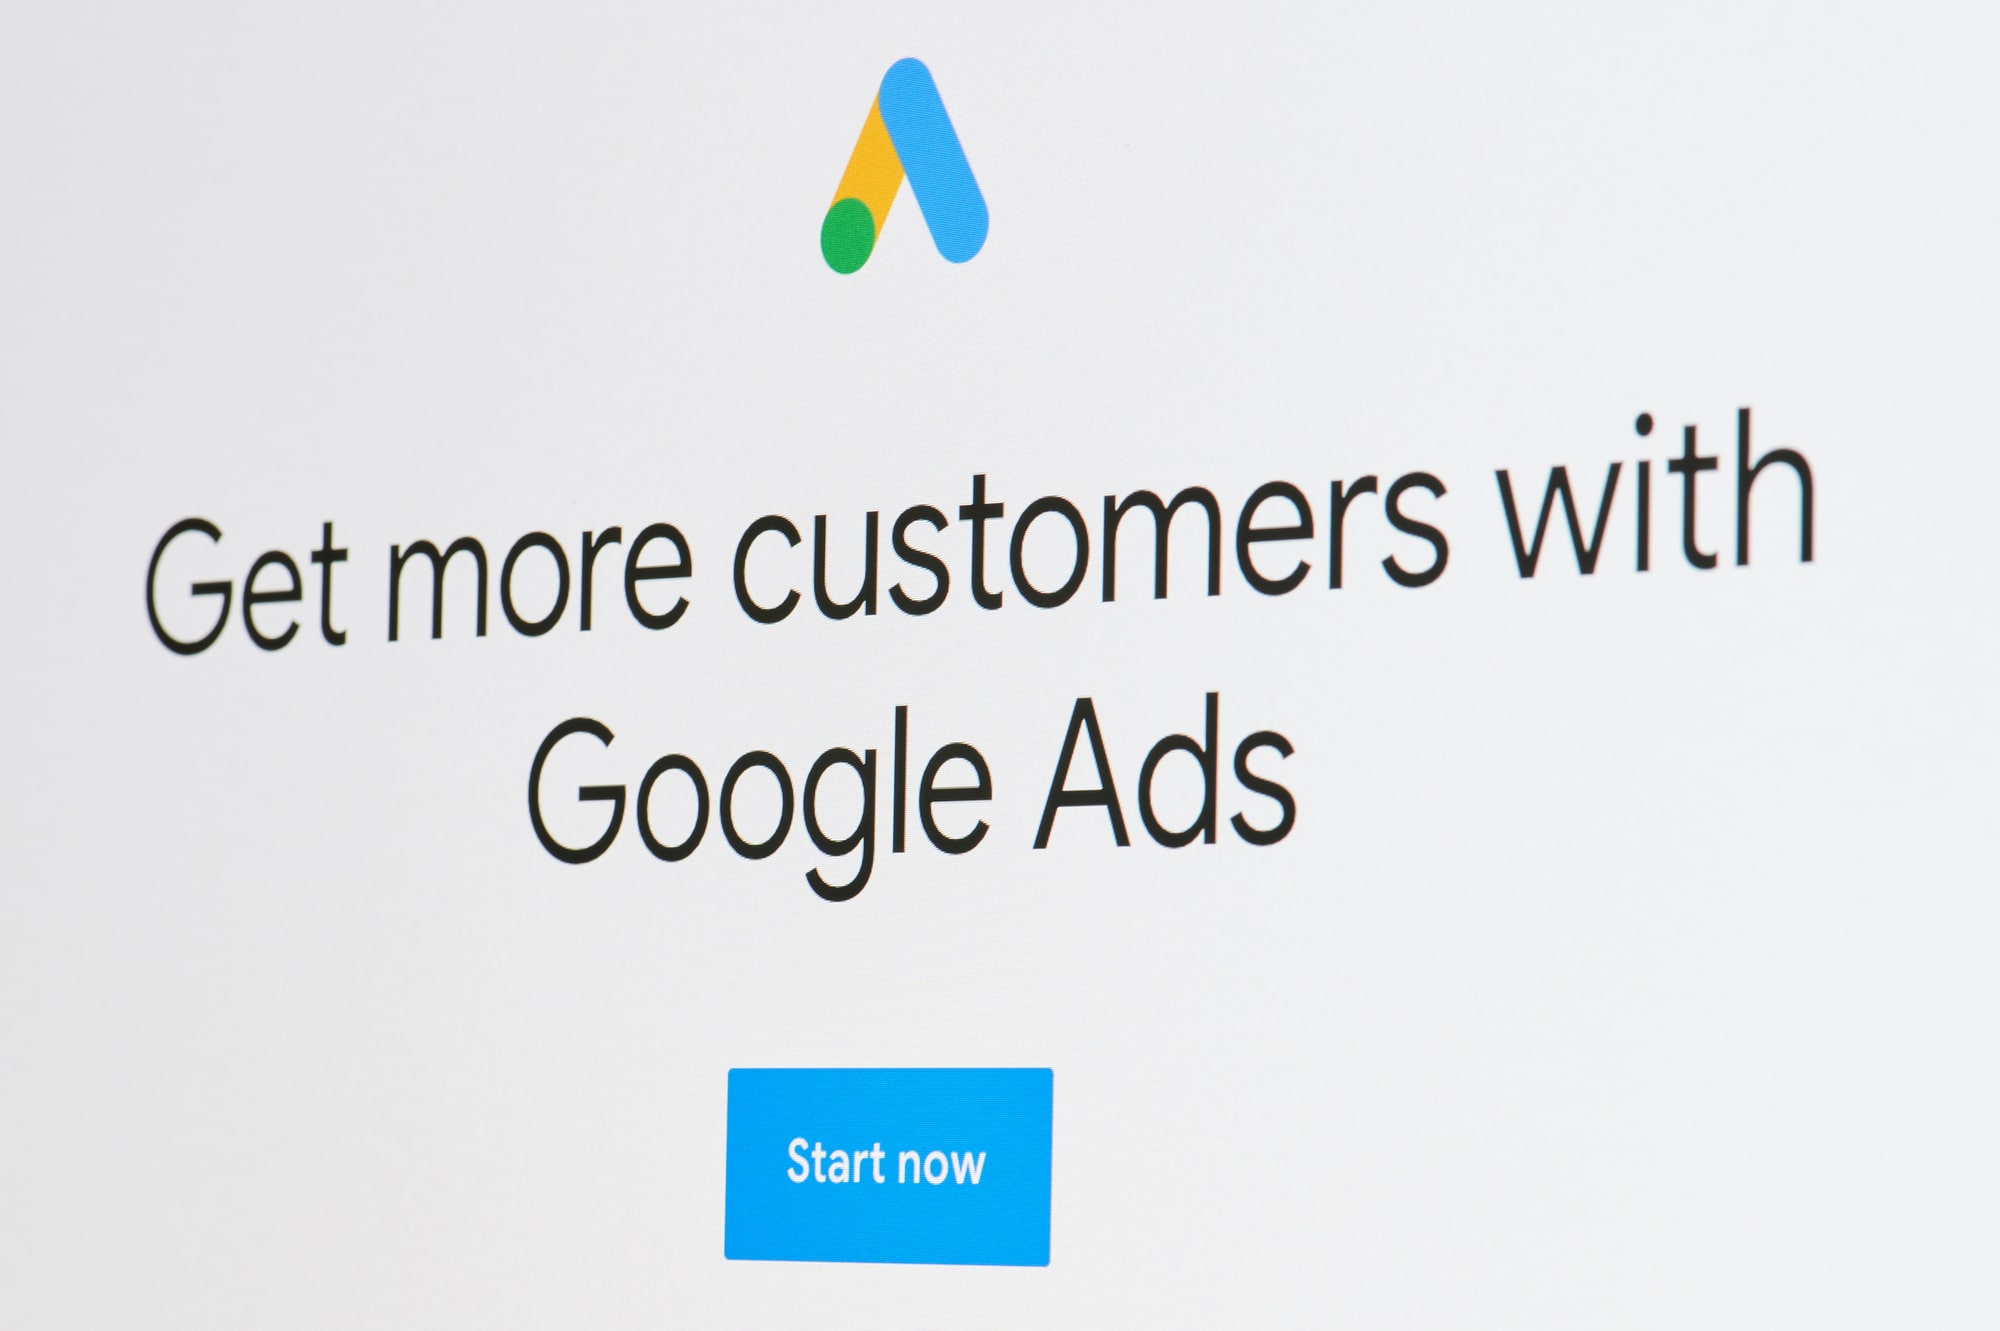 “Get more customers with Google Ads” text on a digital screen on the Google Ads setup screen before they show users the different Google Ad types.